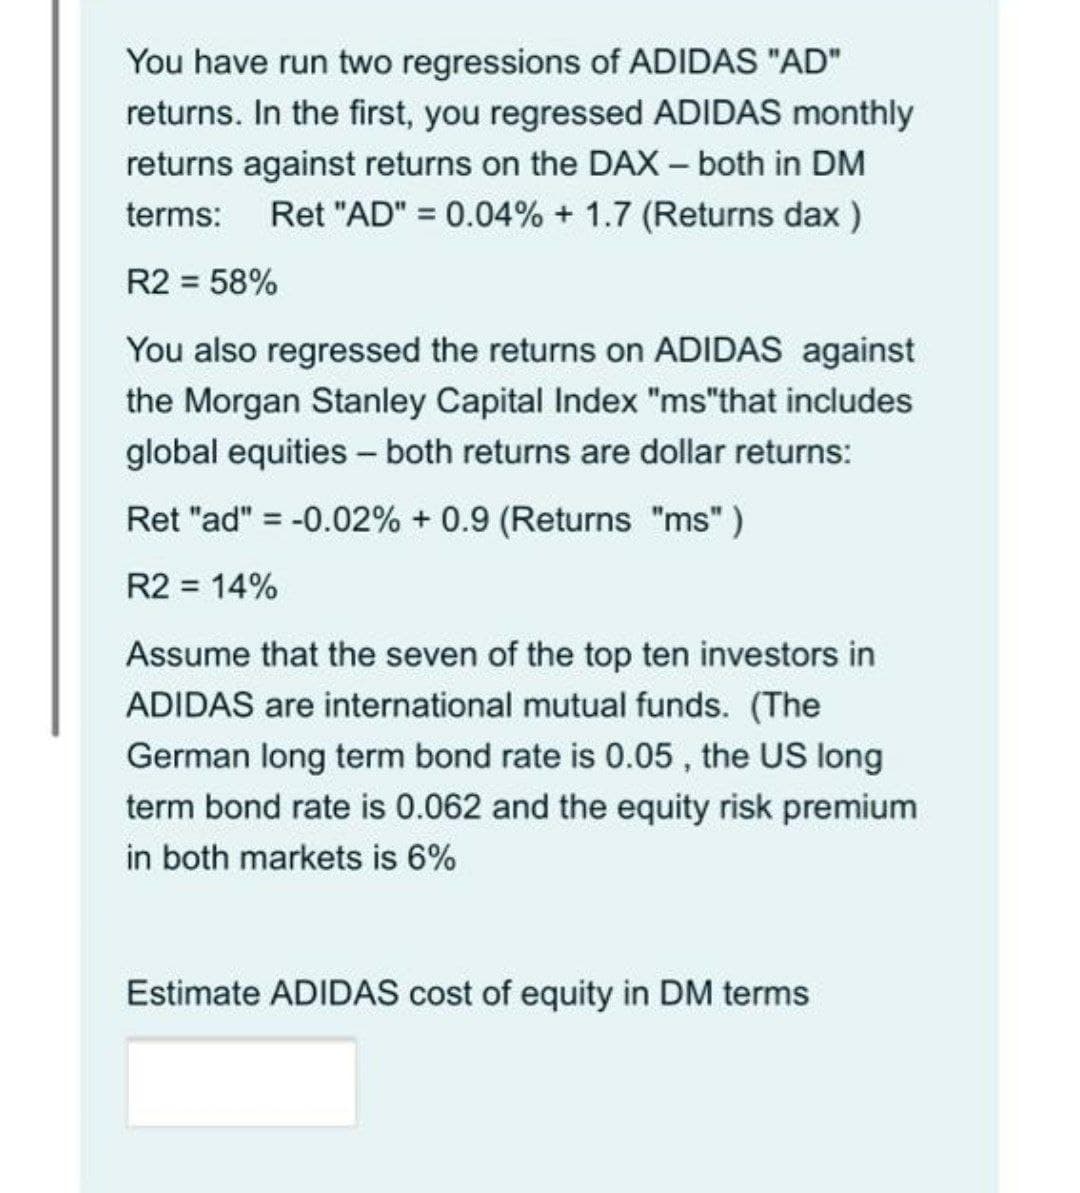 You have run two regressions of ADIDAS "AD"
returns. In the first, you regressed ADIDAS monthly
returns against returns on the DAX – both in DM
terms: Ret "AD" = 0.04% + 1.7 (Returns dax )
R2 = 58%
You also regressed the returns on ADIDAS against
the Morgan Stanley Capital Index "ms"that includes
global equities - both returns are dollar returns:
Ret "ad" = -0.02% + 0.9 (Returns "ms" )
R2 = 14%
Assume that the seven of the top ten investors in
ADIDAS are international mutual funds. (The
German long term bond rate is 0.05 , the US long
term bond rate is 0.062 and the equity risk premium
in both markets is 6%
Estimate ADIDAS cost of equity in DM terms
